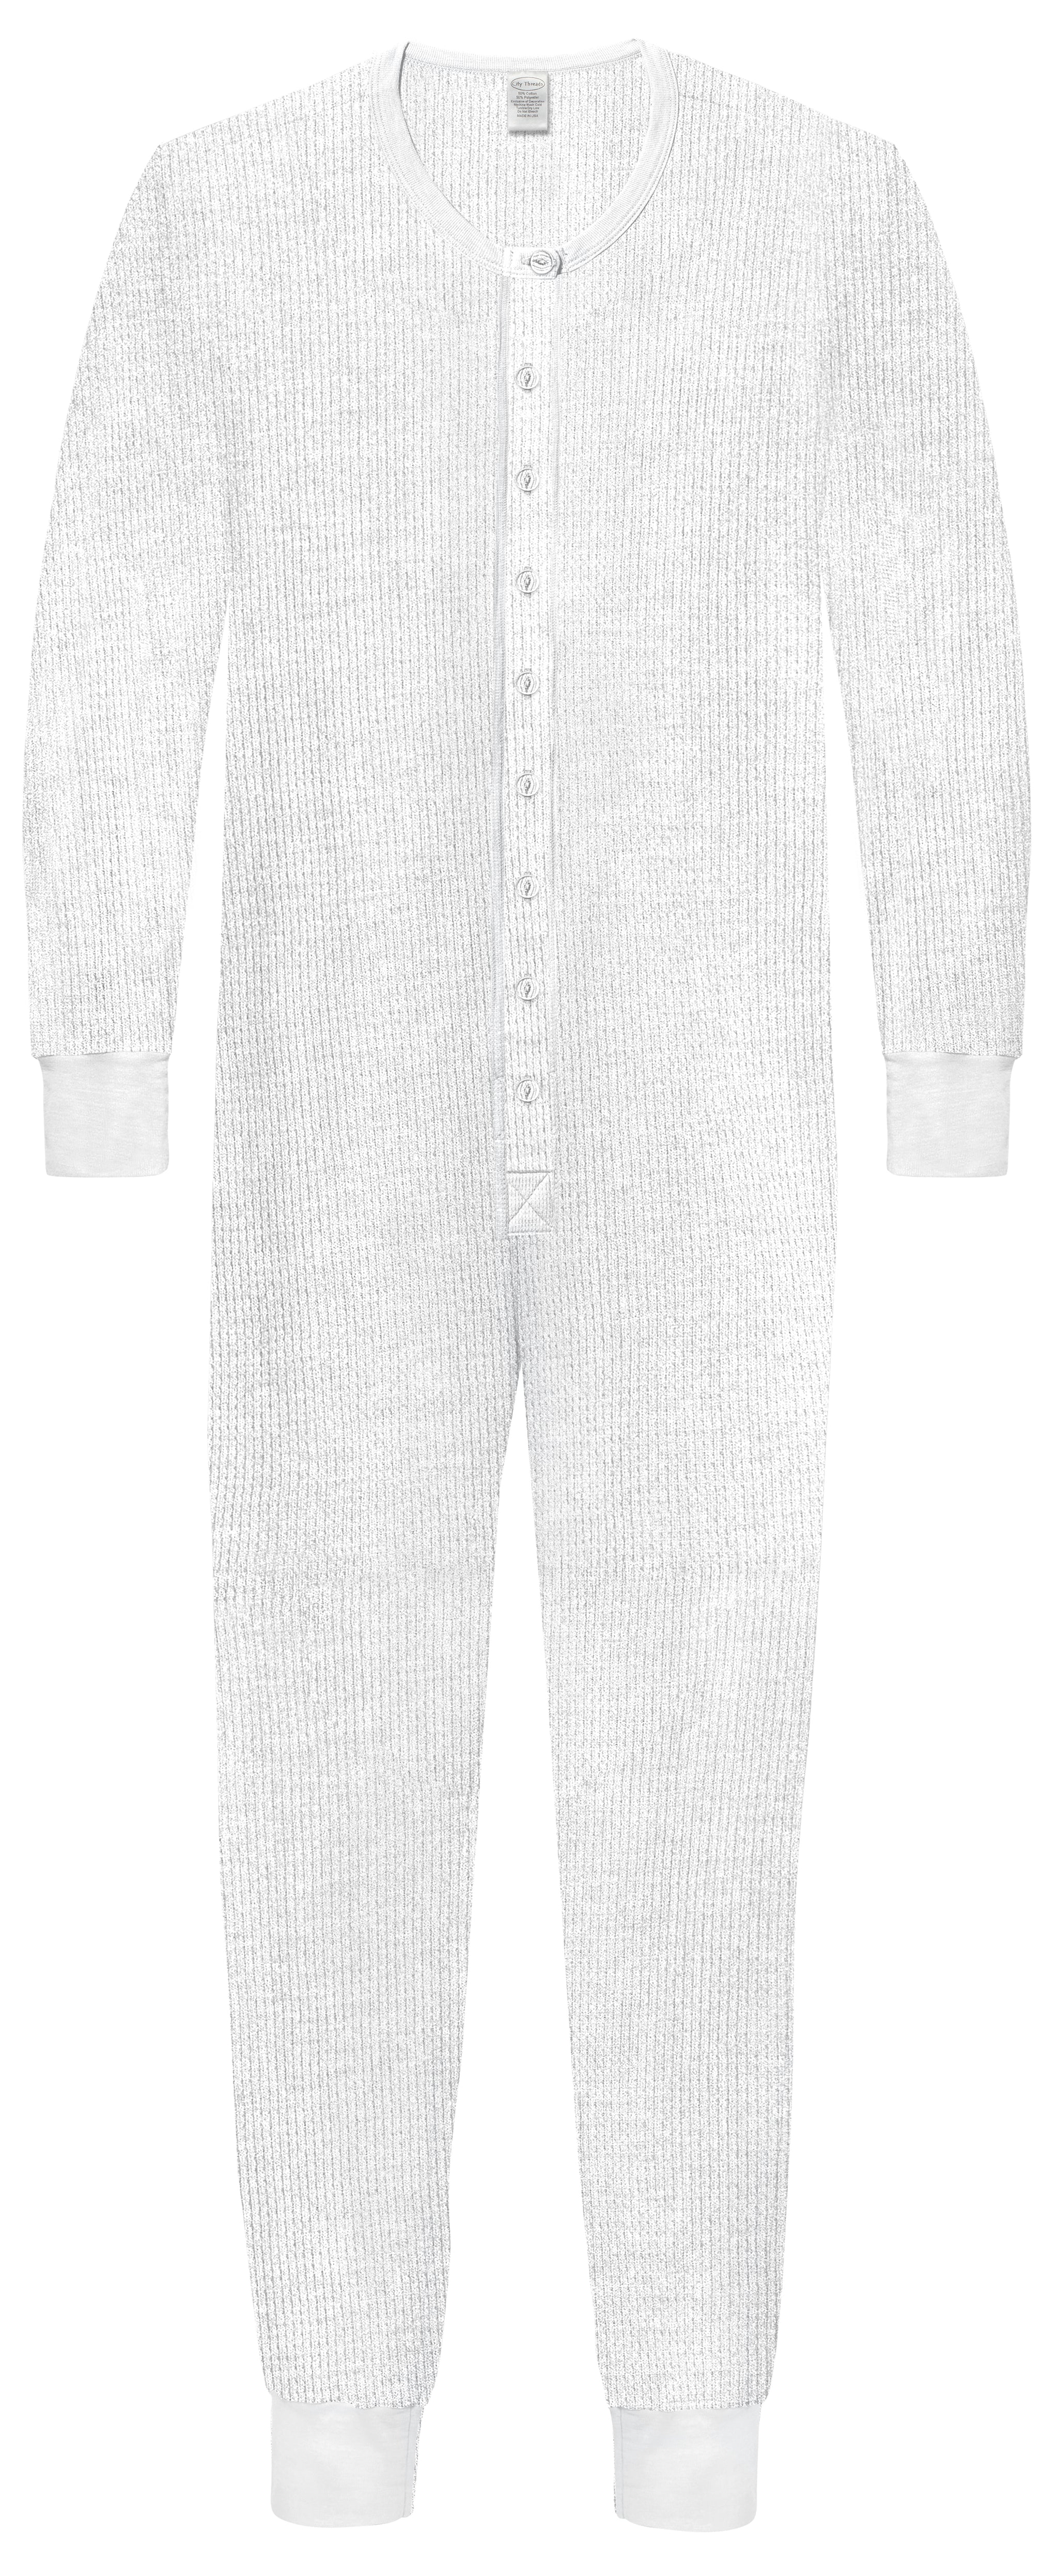 Men's Thermal Union Suit - City Threads USA